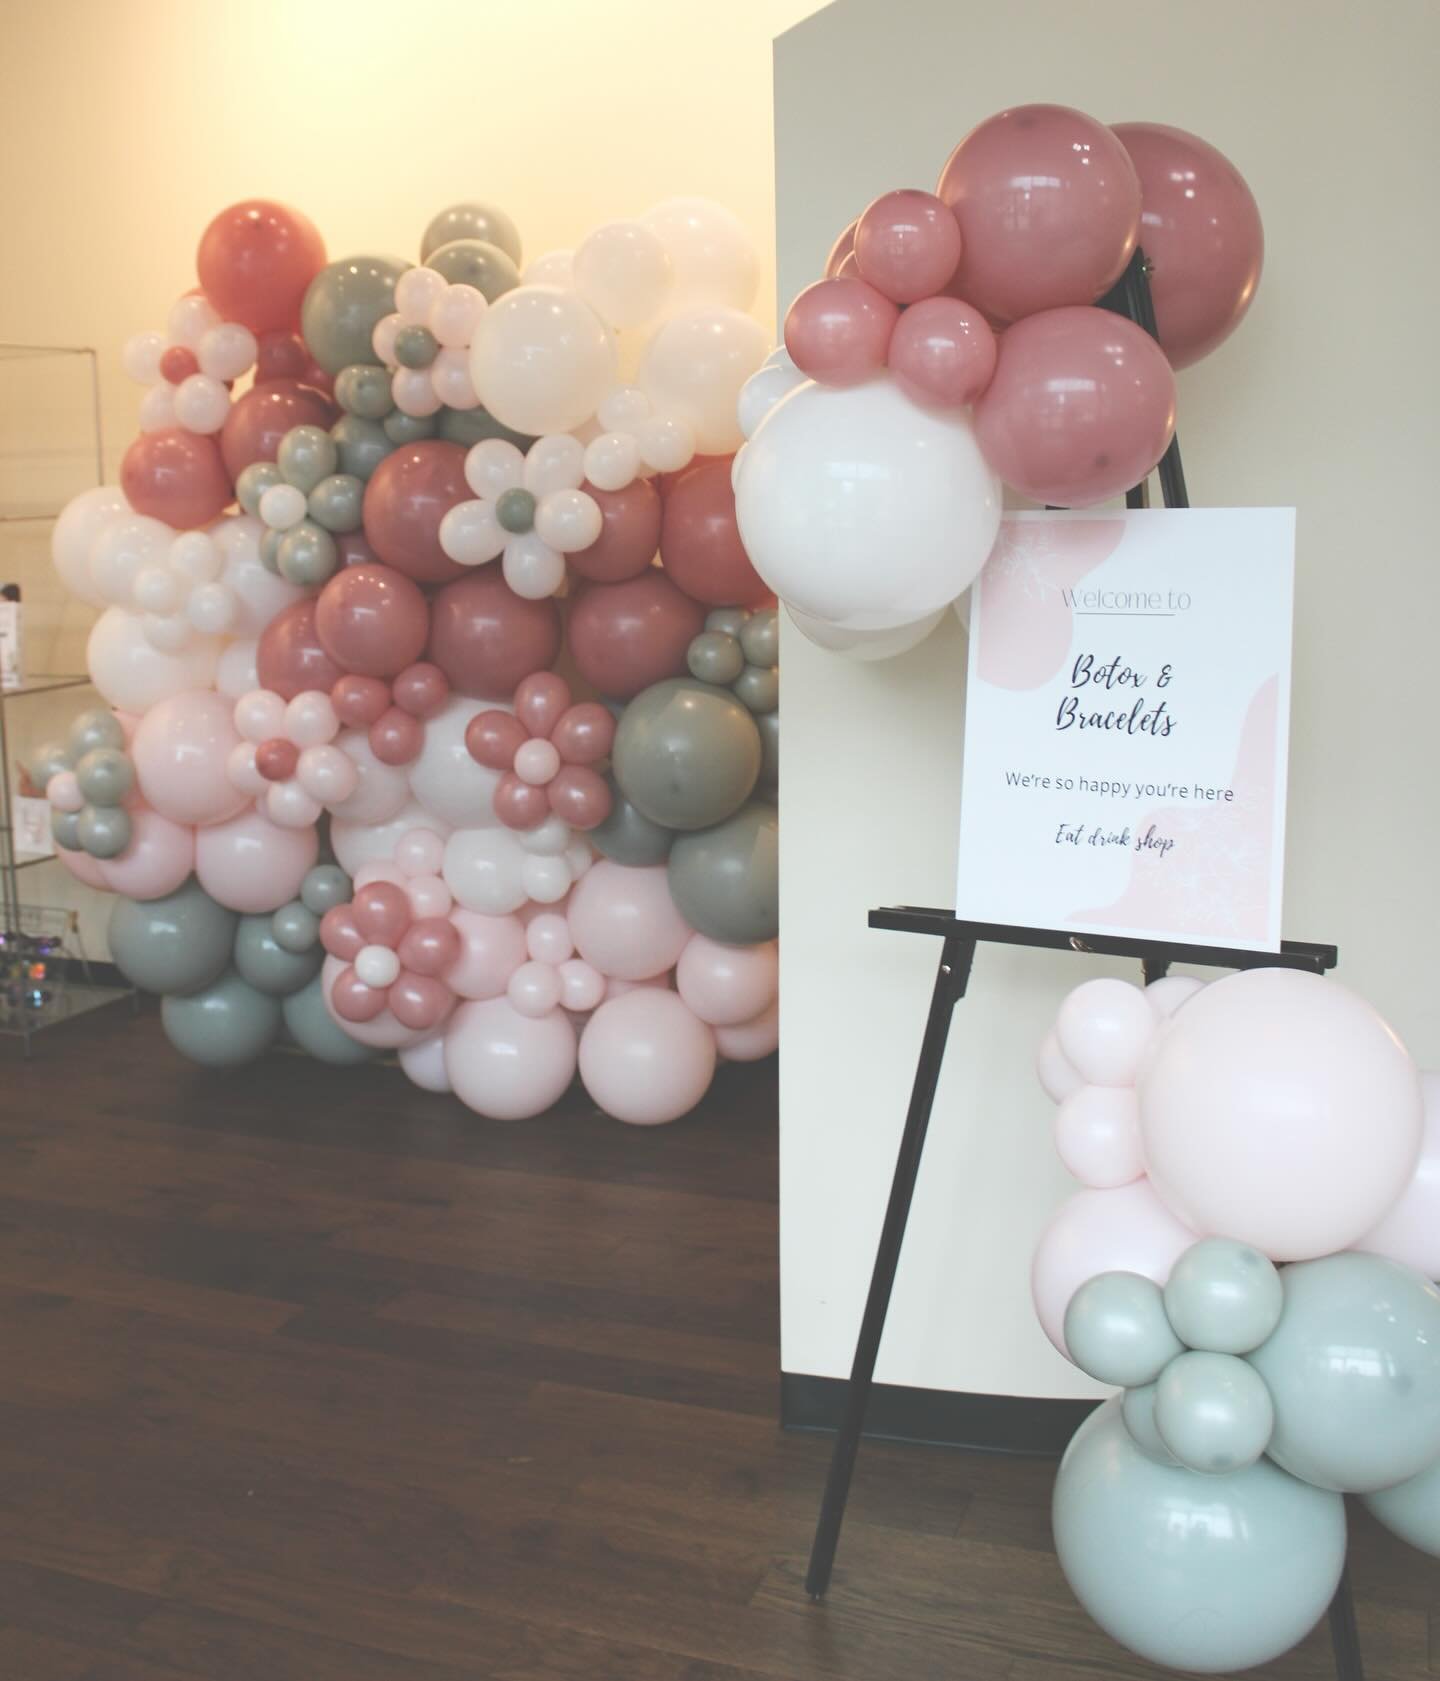 We ALWAYS love a reason to celebrate mommas🫶🏼🌸
&bull;
So much fun at @simplybellaaesthetics Botox and Bracelets Mothers Day Event😍
#stlballoons #stlparty #stlouis #balloons #balloonbusiness #smallbusiness #smallbusinessowner #womenownedbusiness #